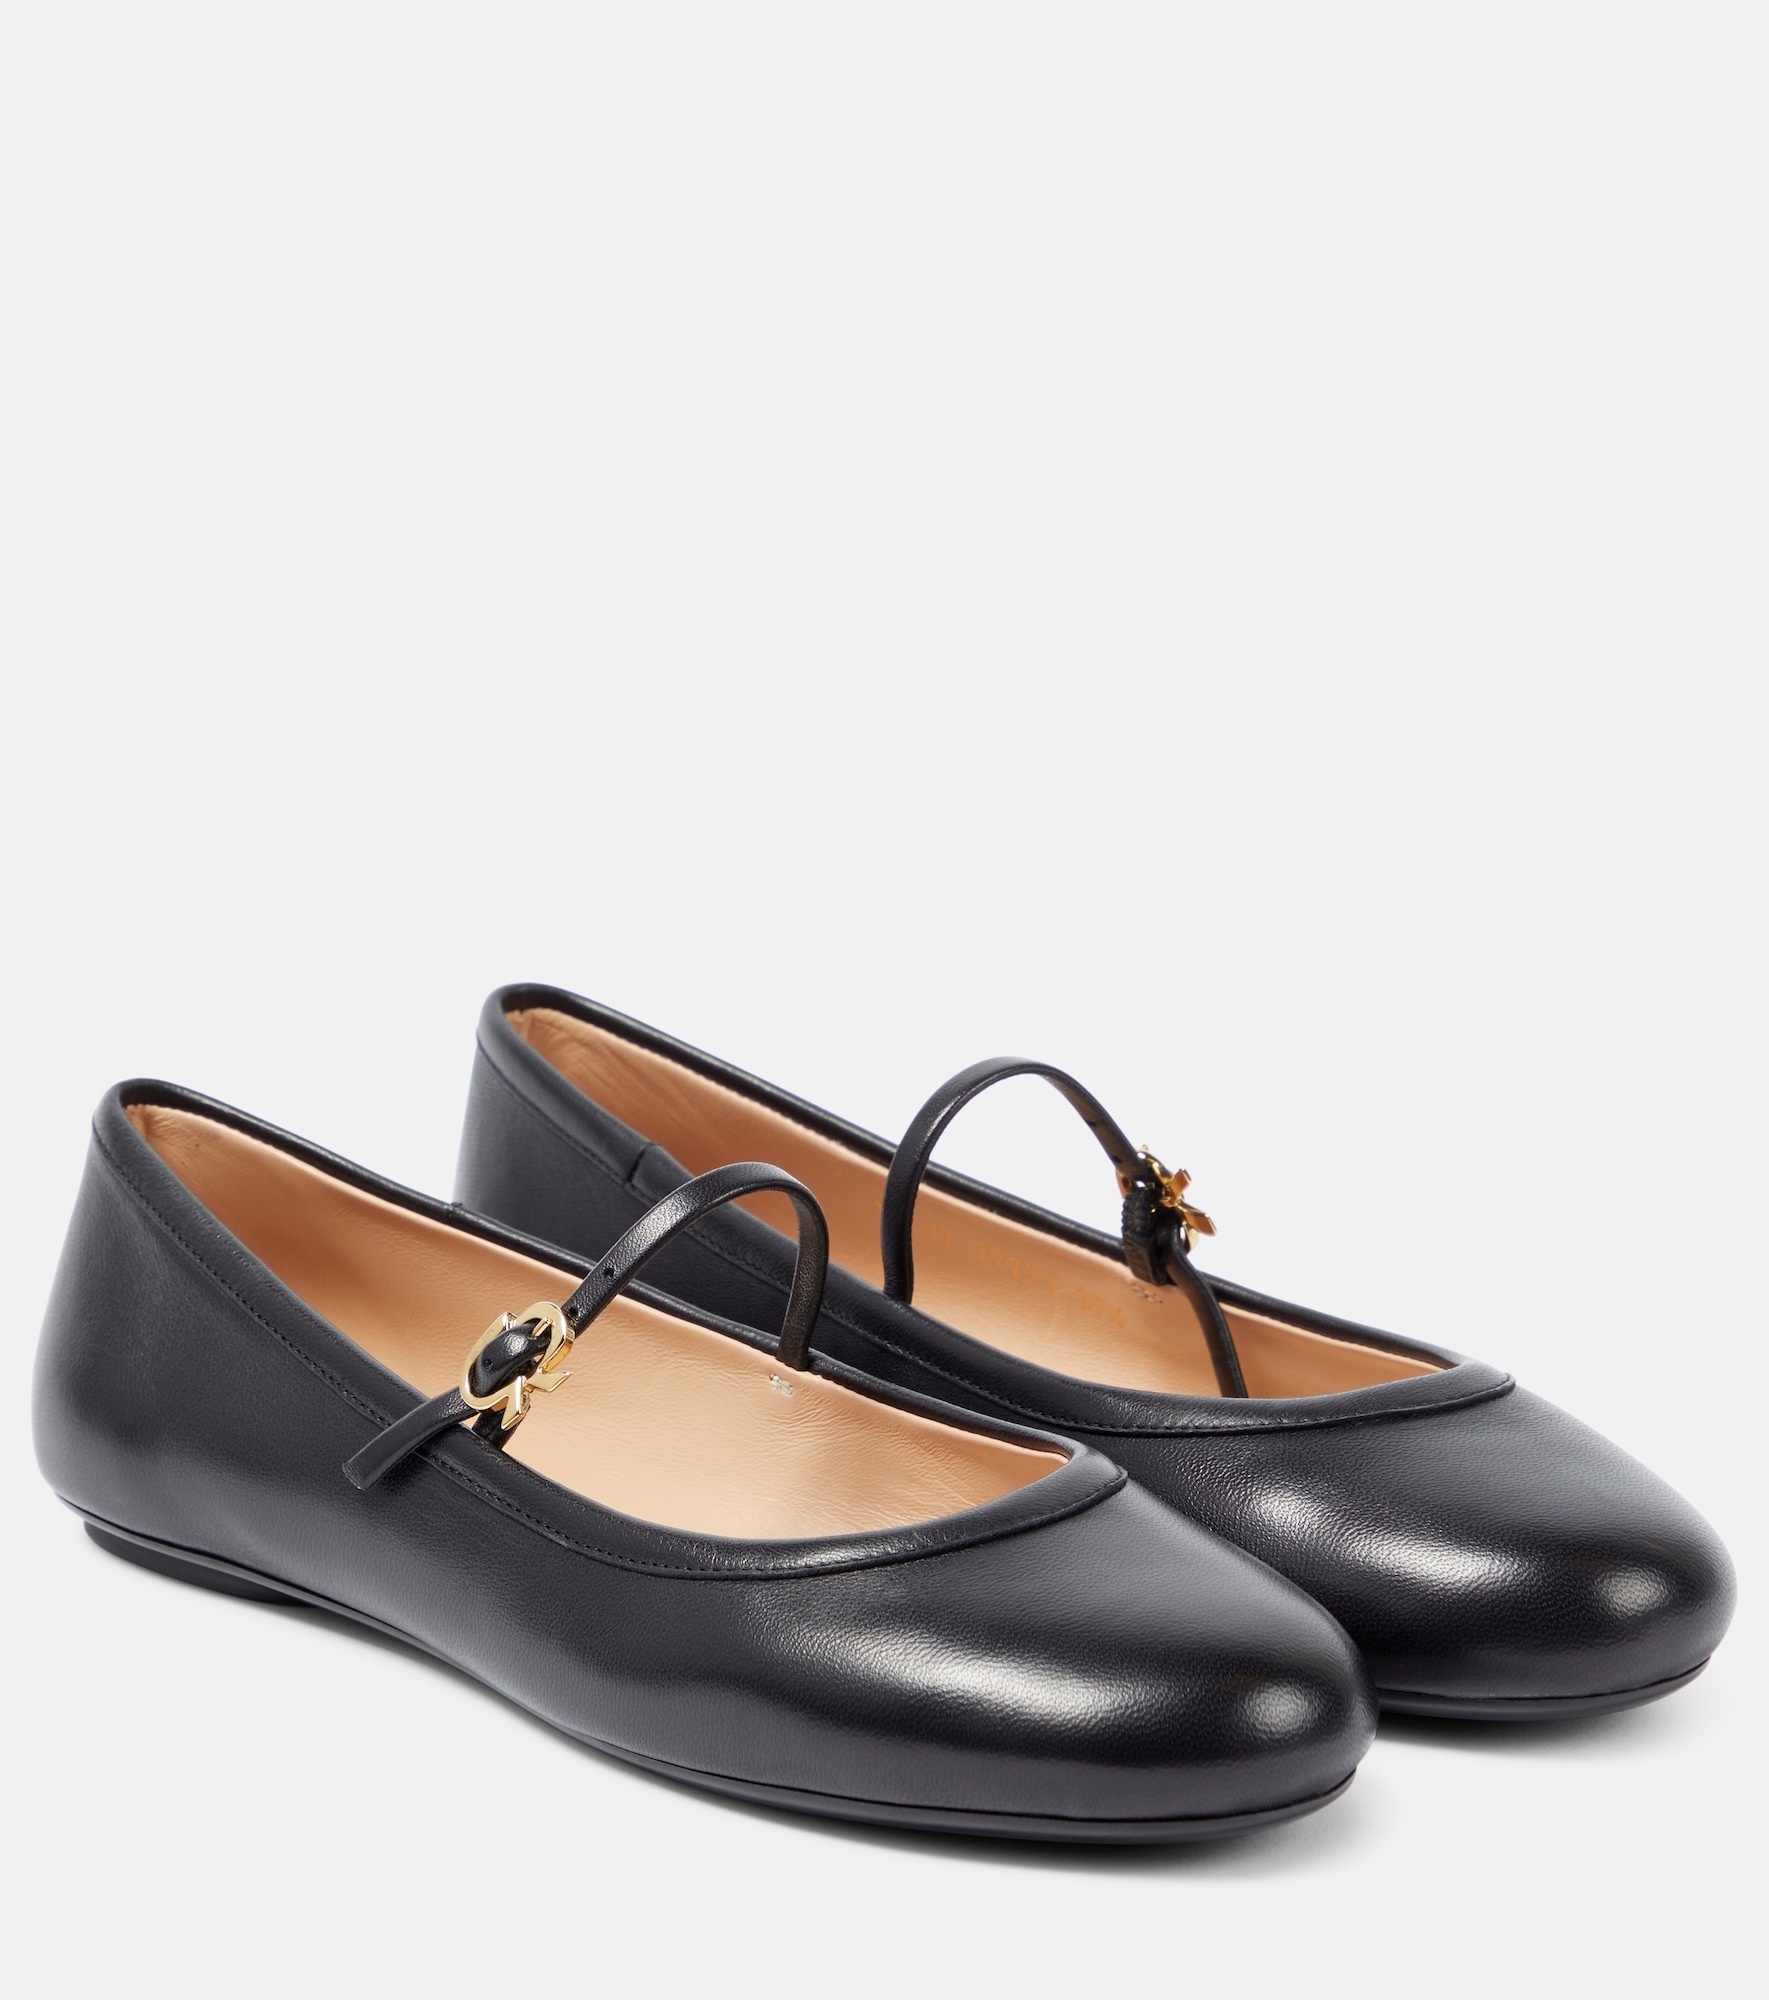 Carla leather Mary Jane ballet flats - 1